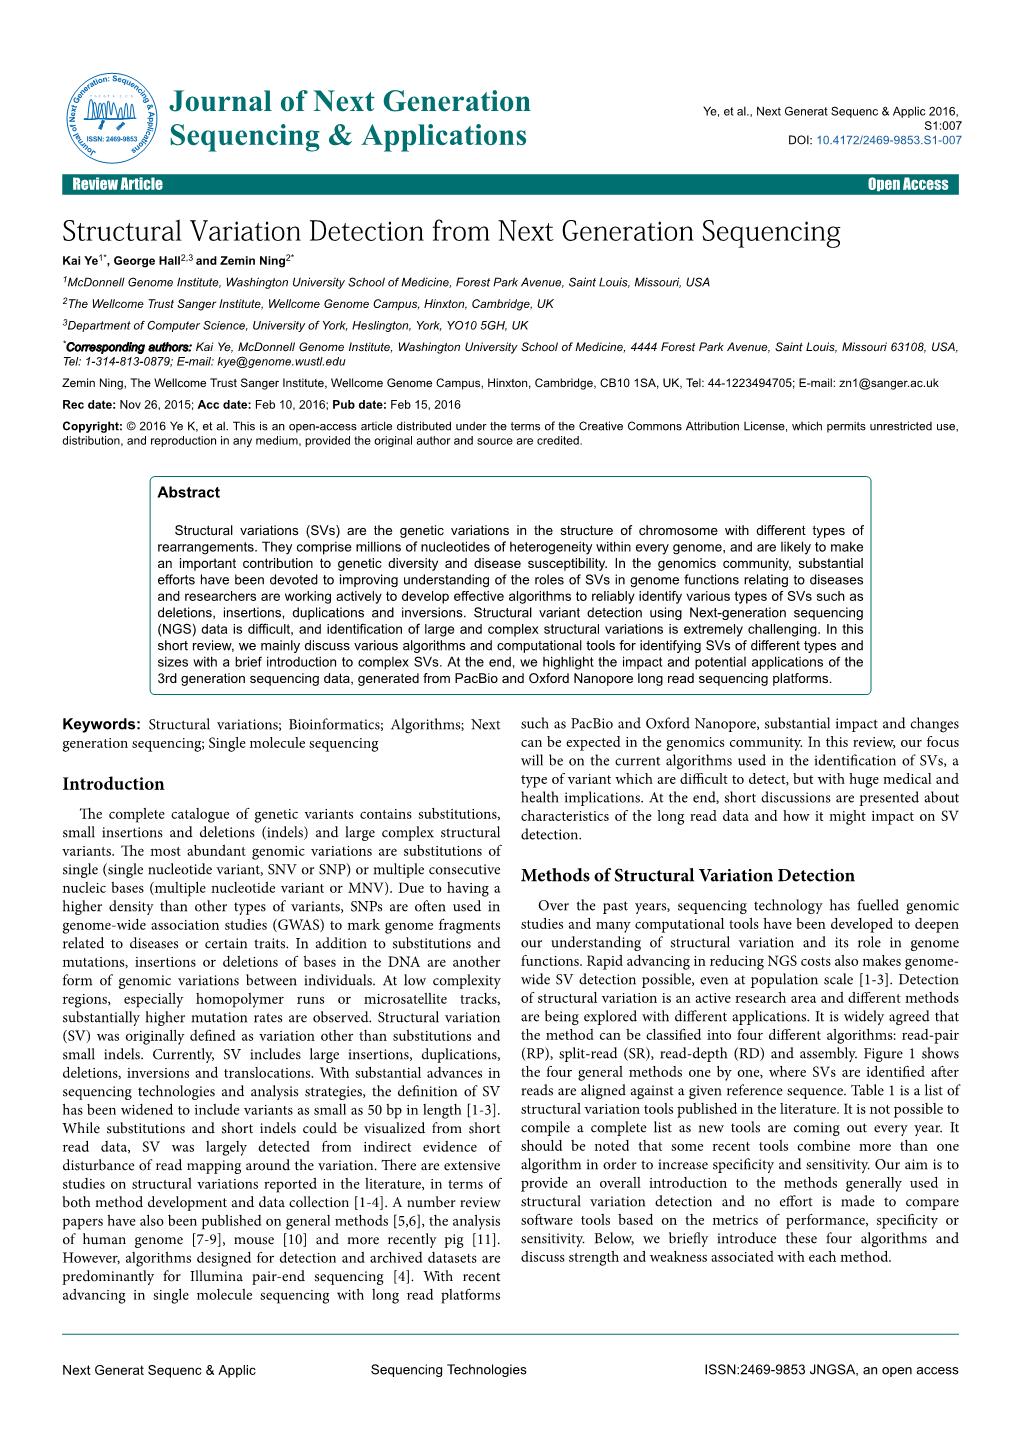 Structural Variation Detection from Next Generation Sequencing